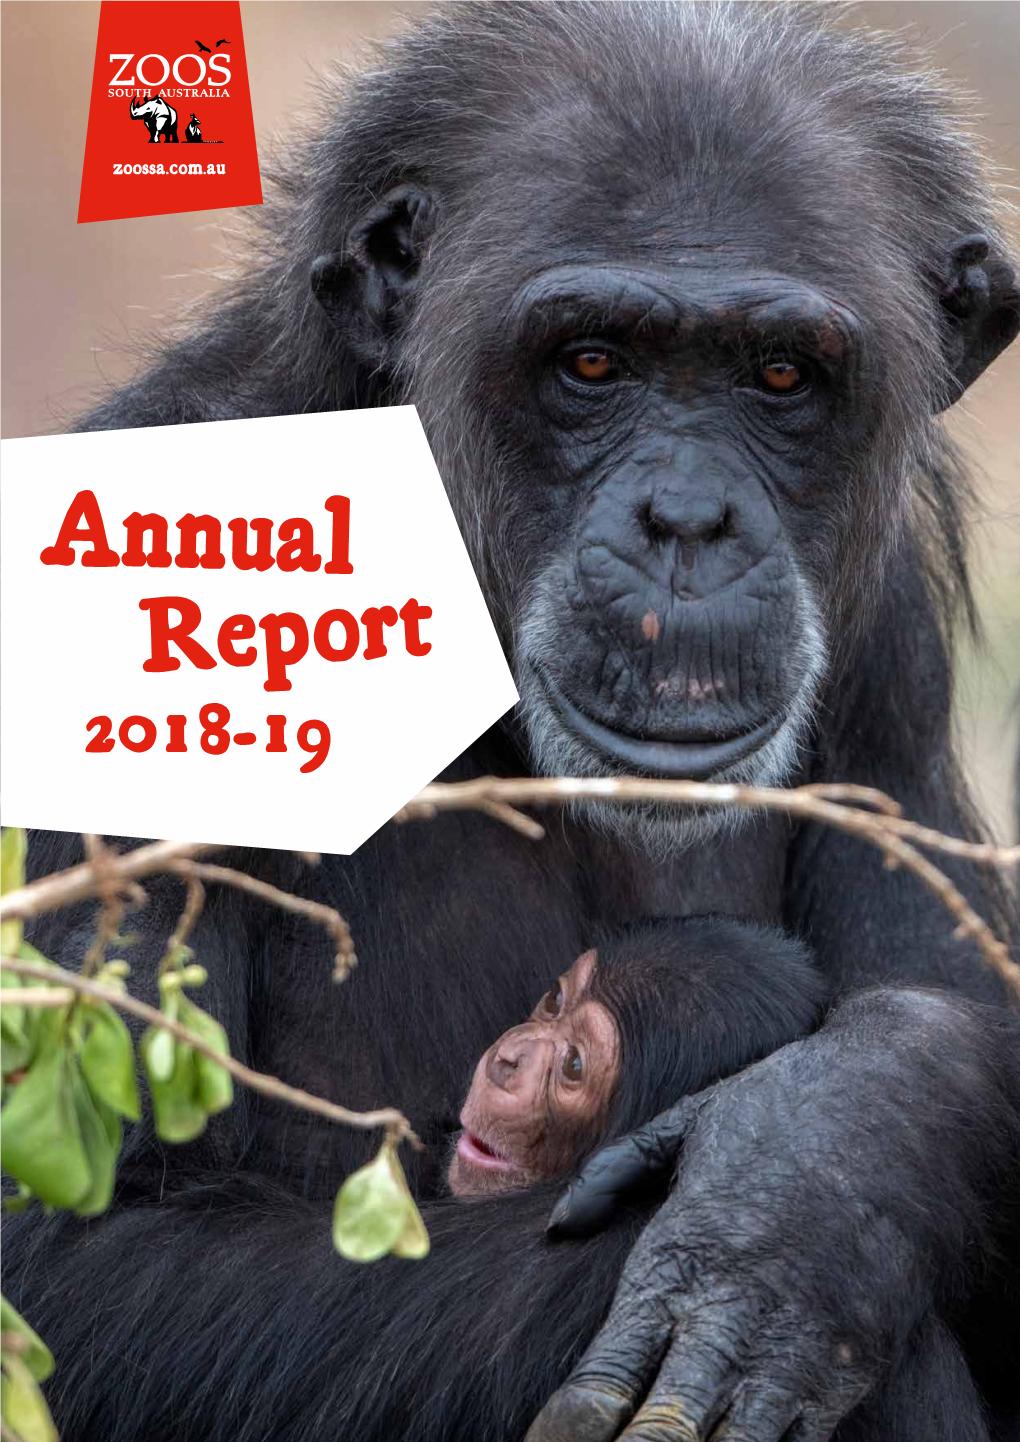 Zoos SA Annual Report 2018/2019